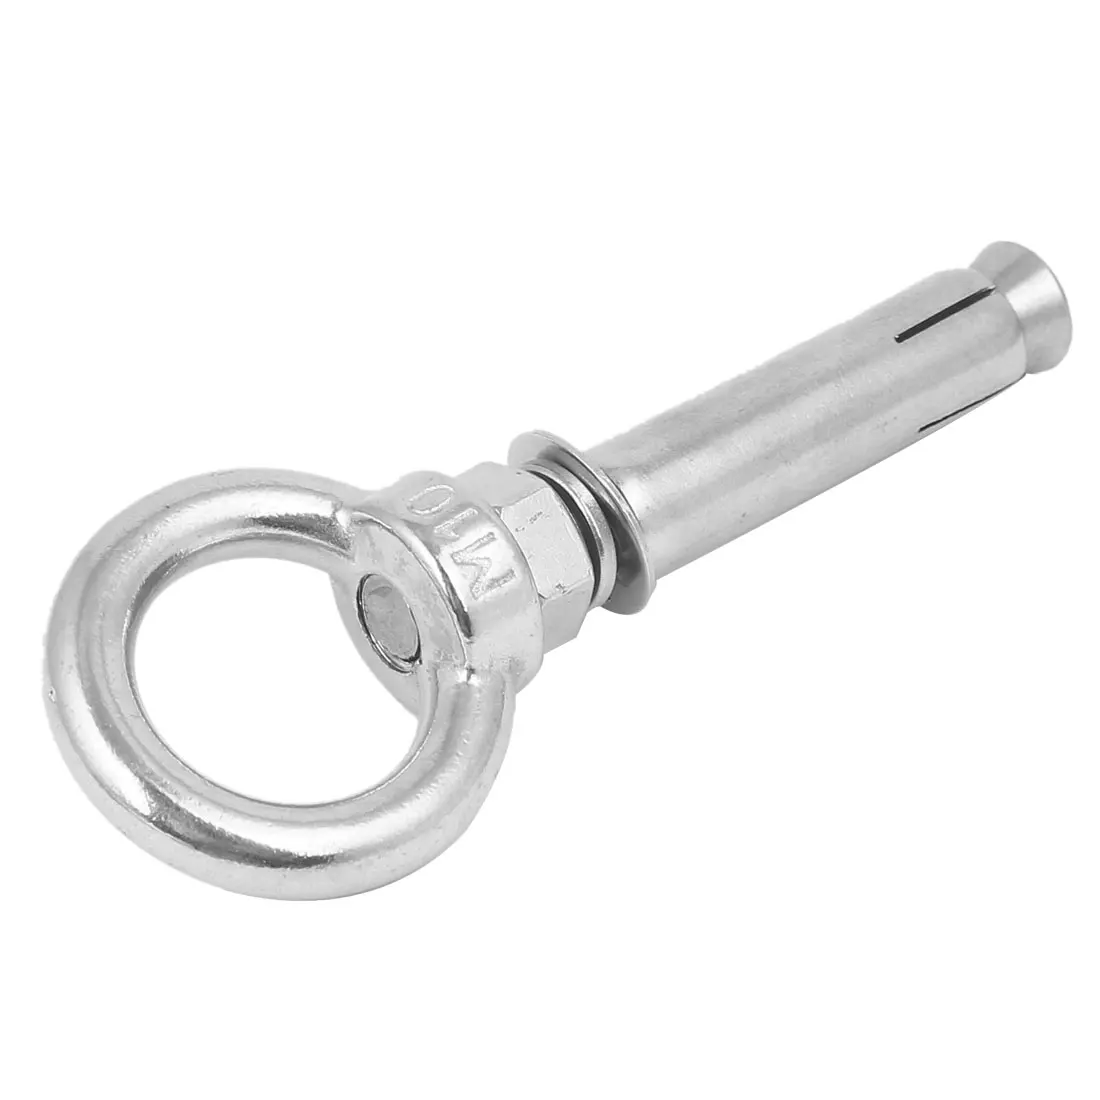 M10 x 80mm 304 Stainless Steel Ring Lifting Anchor Expansion Hook Eye Bolt (1600716815042)